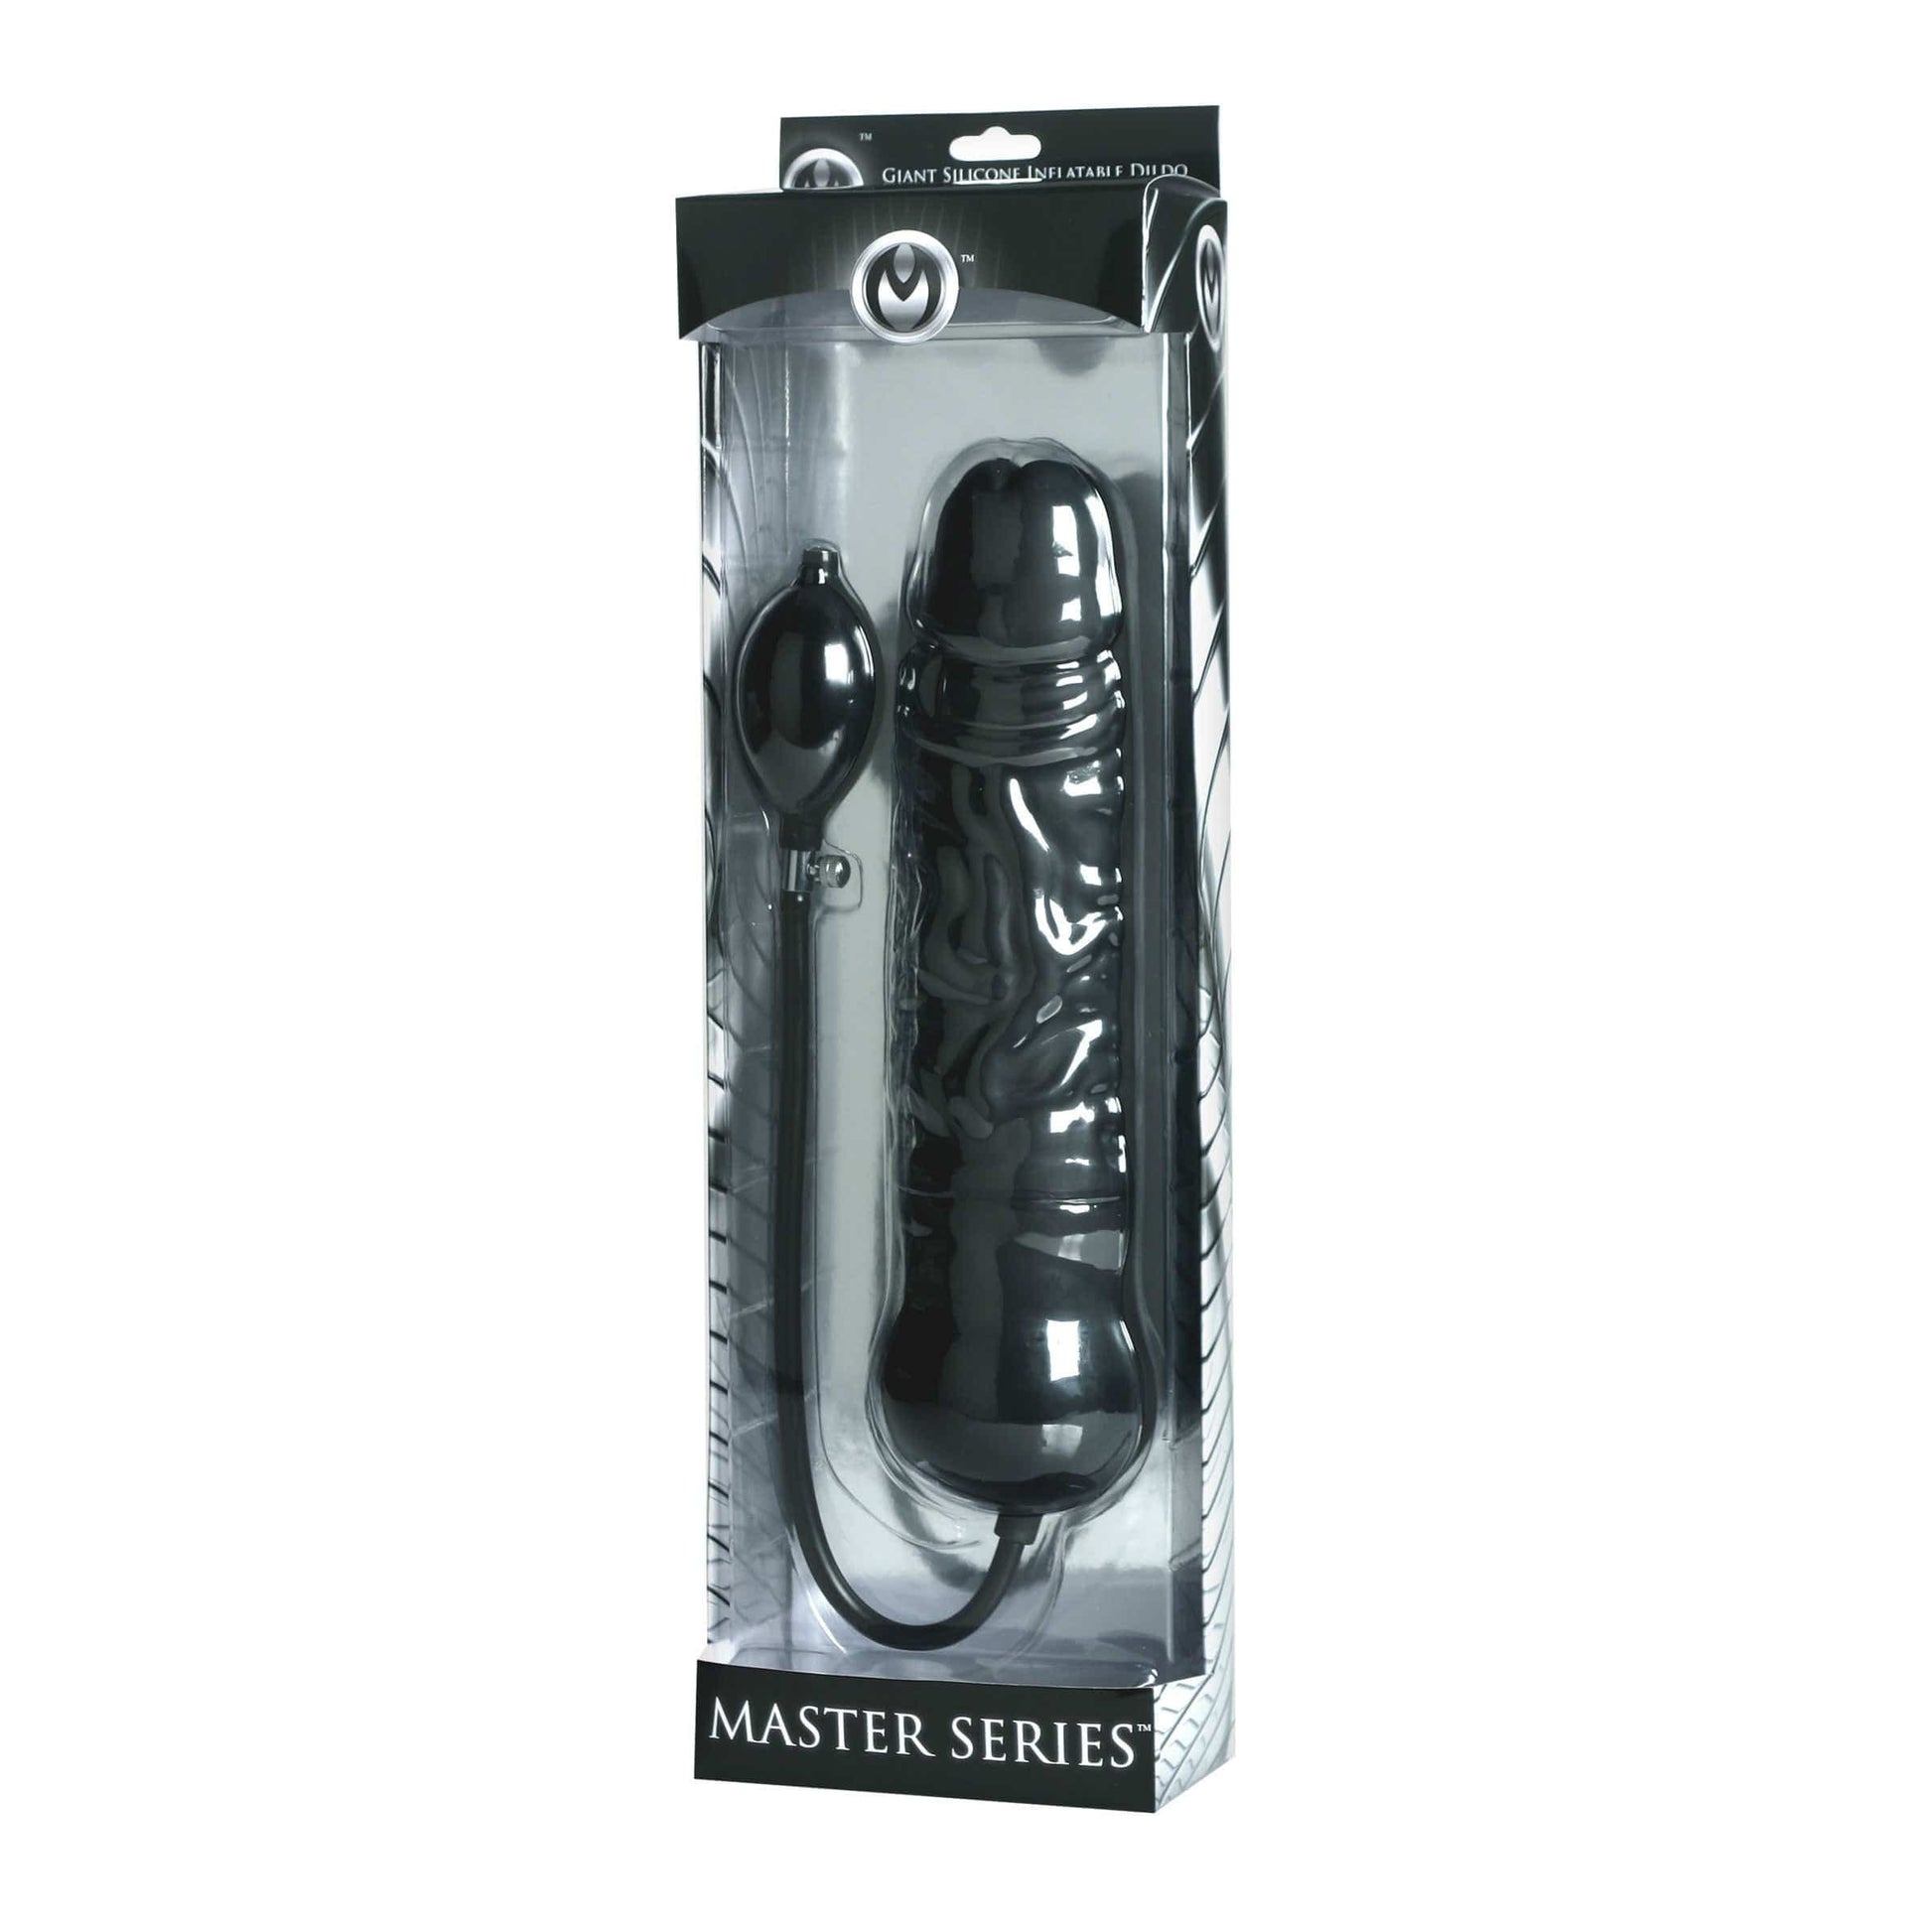 Master Series Realistic Dildo Leviathan Giant Inflatable Silicone Dildo With Internal Core at the Haus of Shag